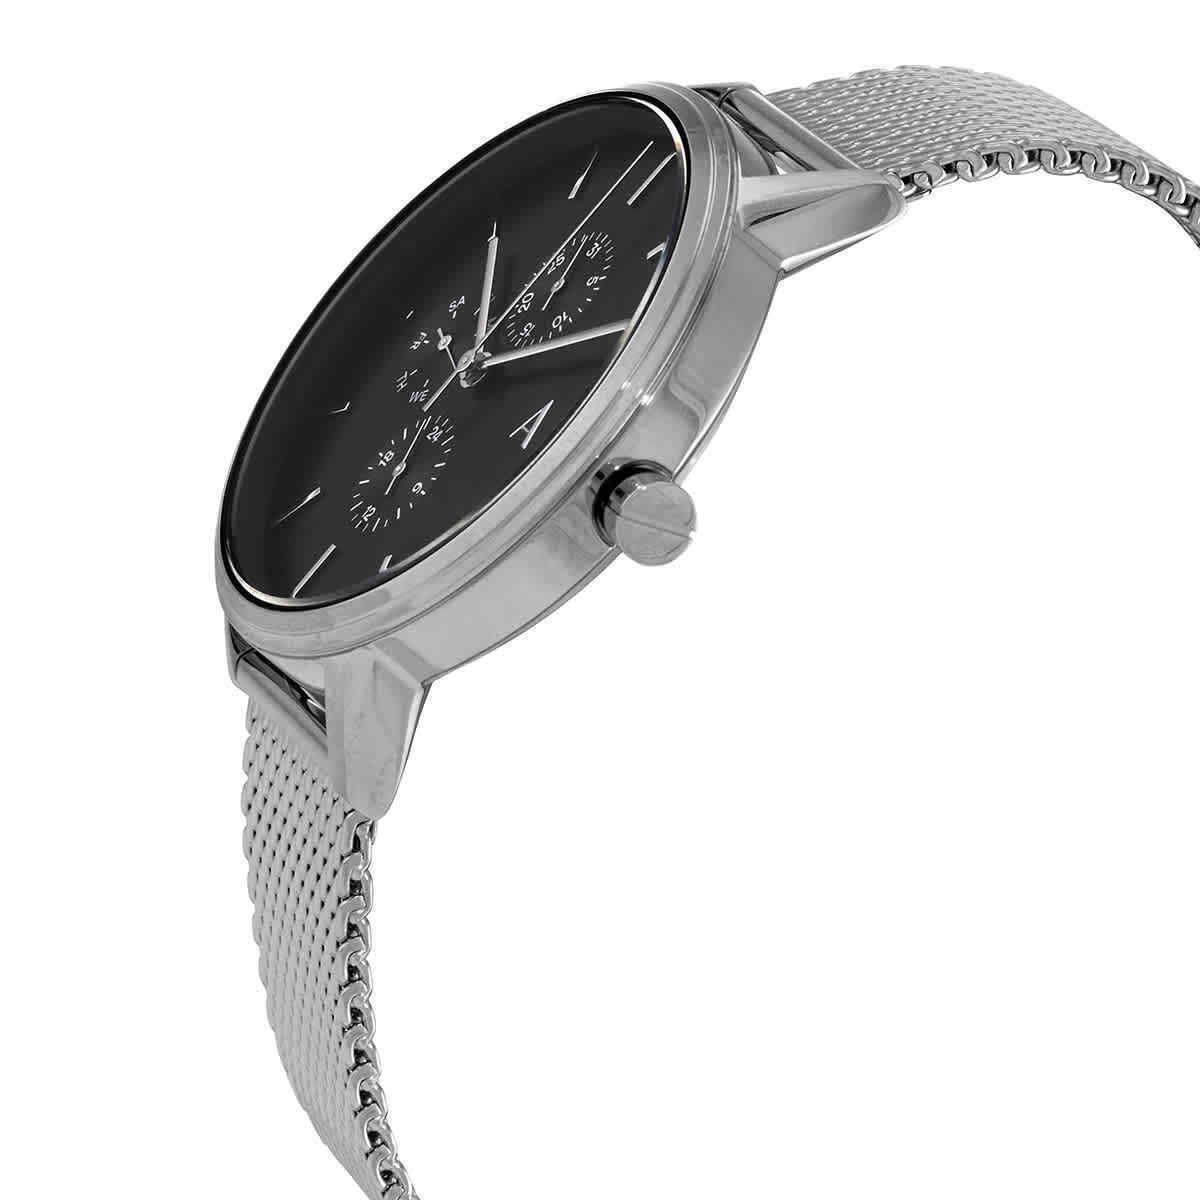 This Armani Exchange Cayde Multi Dial Watch for Men is the perfect timepiece to wear or to gift. It's Silver 42 mm Round case combined with the comfortable Silver Stainless steel watch band will ensure you enjoy this stunning timepiece without any compromise. Operated by a high quality Quartz movement and water resistant to 5 bars, your watch will keep ticking. This fashionable and classic watch matches any outfit at any occasion,it adds style to your life -The watch has a function: 24-hour Display High quality 21 cm length and 19 mm width Silver Stainless steel strap with a Fold over clasp Case diameter: 42 mm,case thickness: 9 mm, case colour: Silver and dial colour: Black